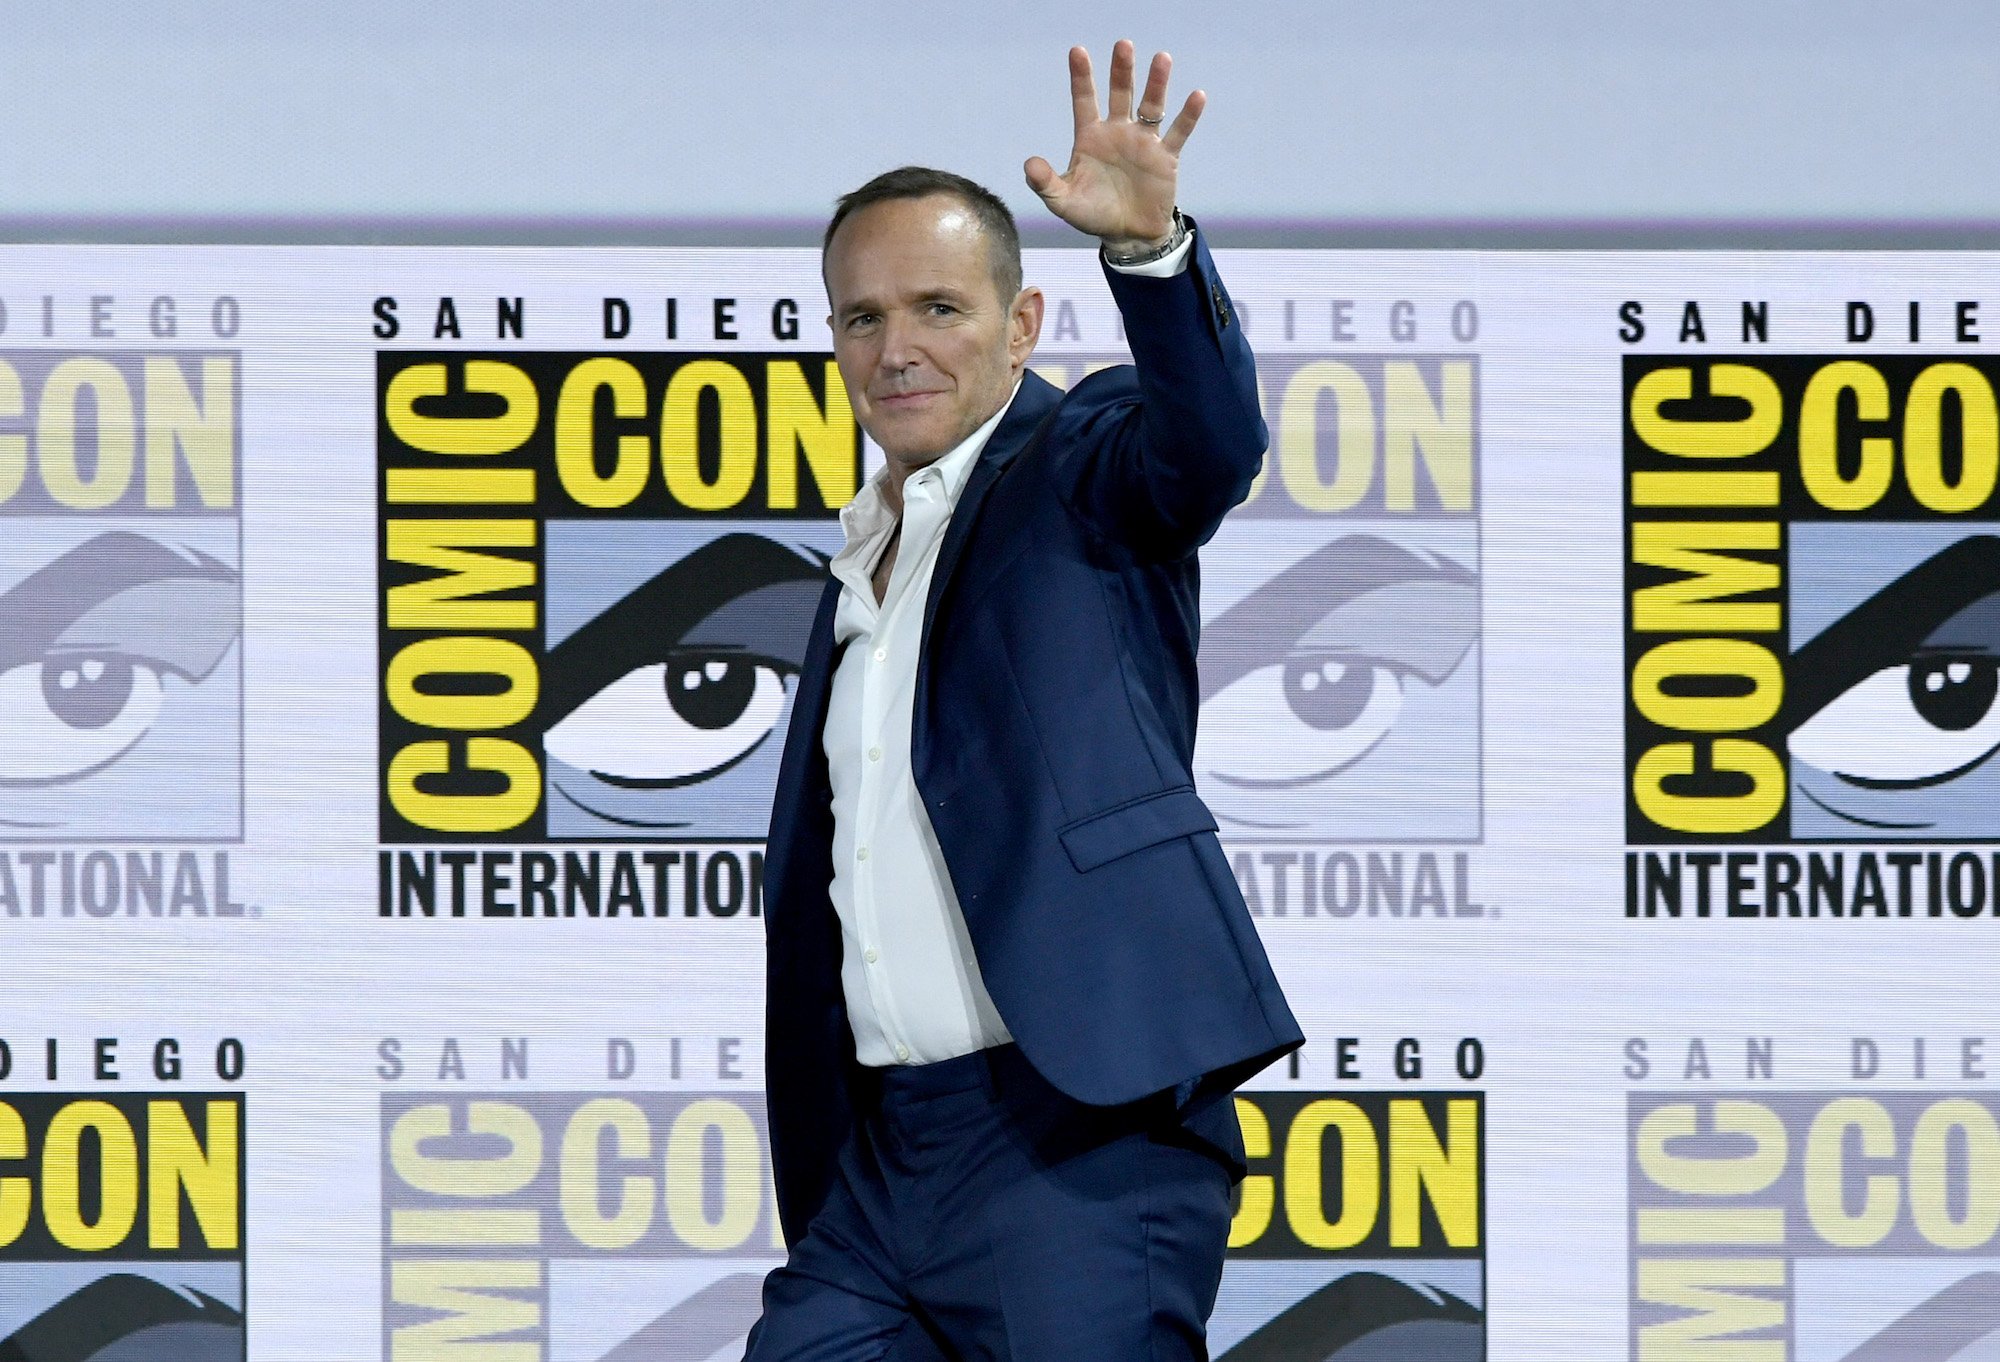 Clark Gregg Has (Almost) Been in the MCU Longer Than Any Other Actor